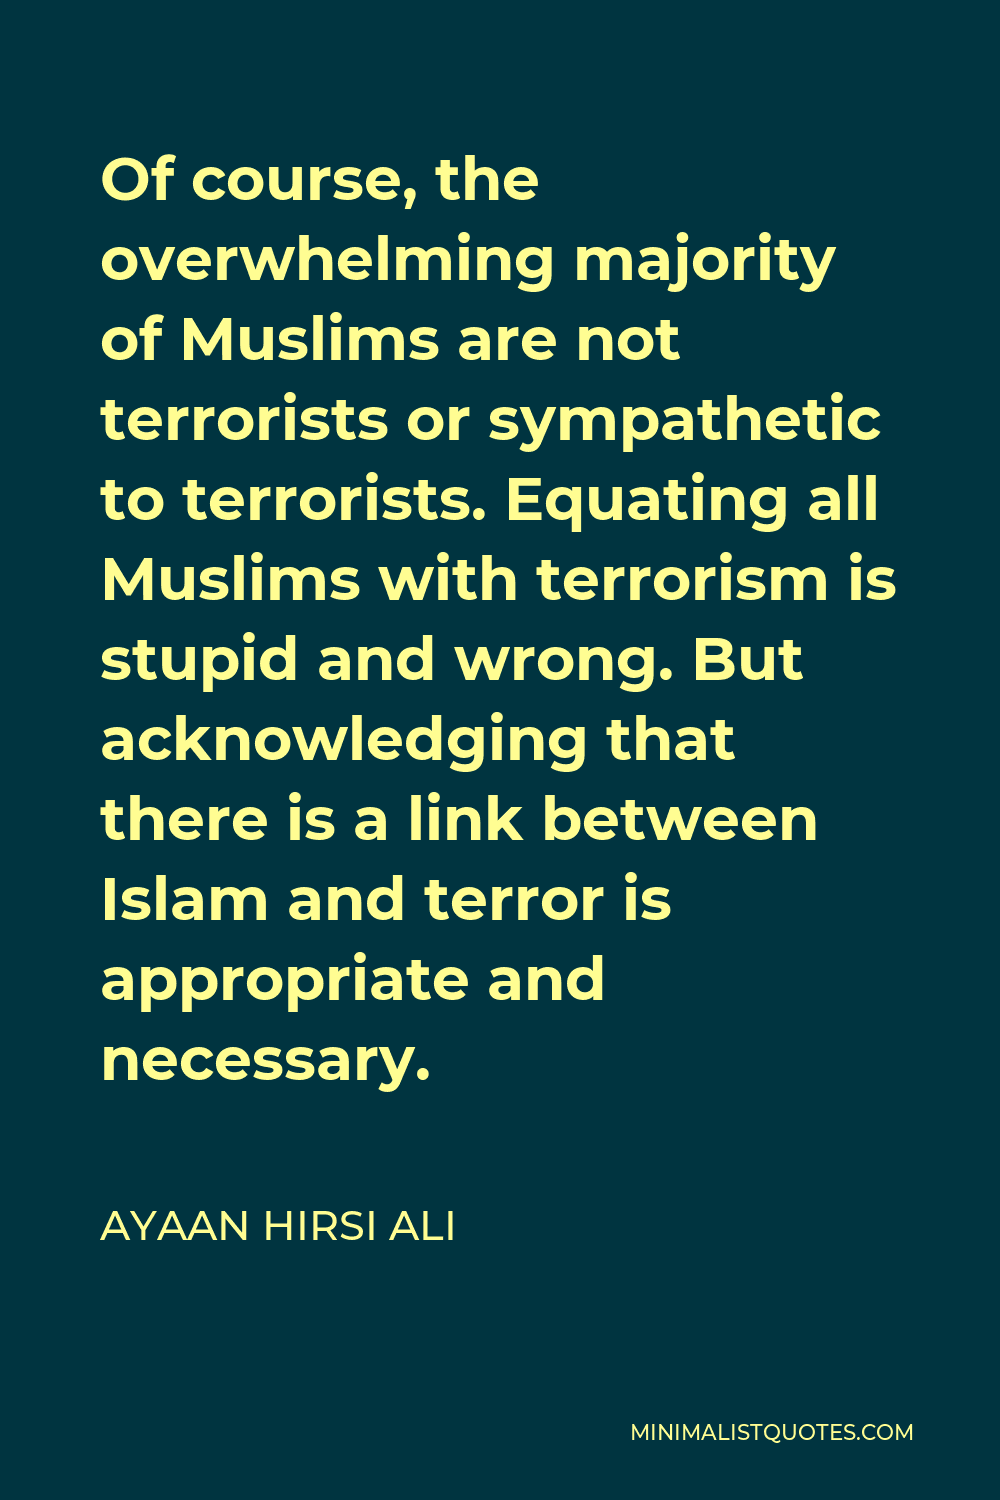 Ayaan Hirsi Ali Quote - Of course, the overwhelming majority of Muslims are not terrorists or sympathetic to terrorists. Equating all Muslims with terrorism is stupid and wrong. But acknowledging that there is a link between Islam and terror is appropriate and necessary.